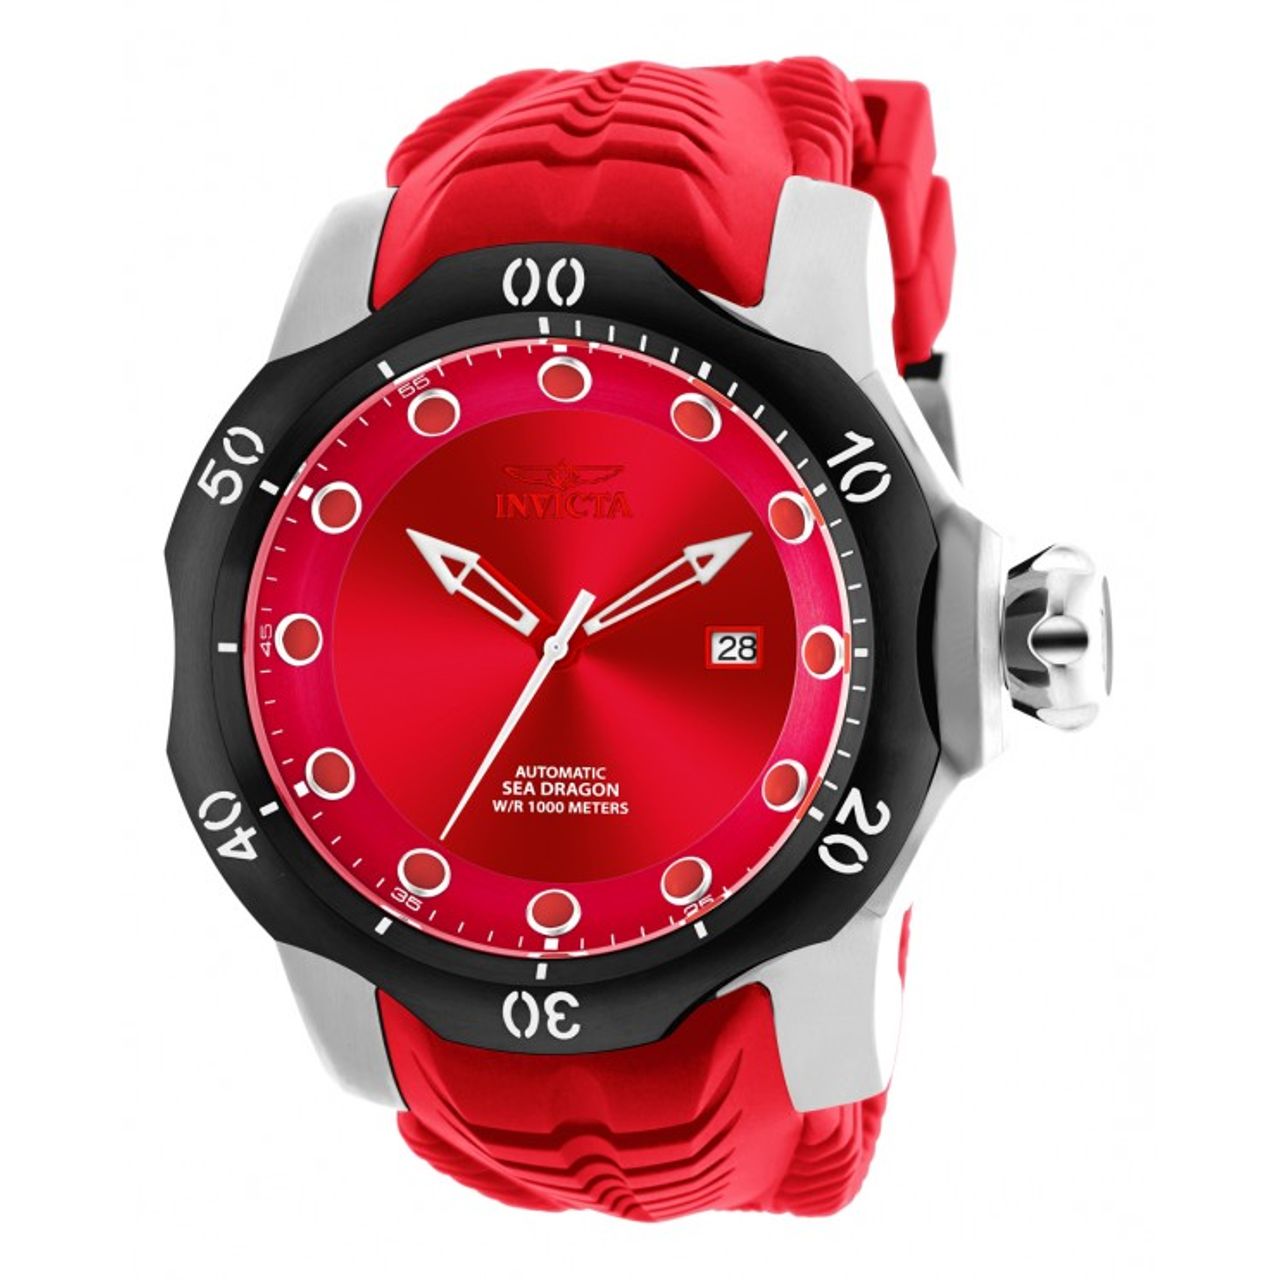 Invicta Venom 19302 Mens Red Dial Analog Automatic Watch with Silicone Strap